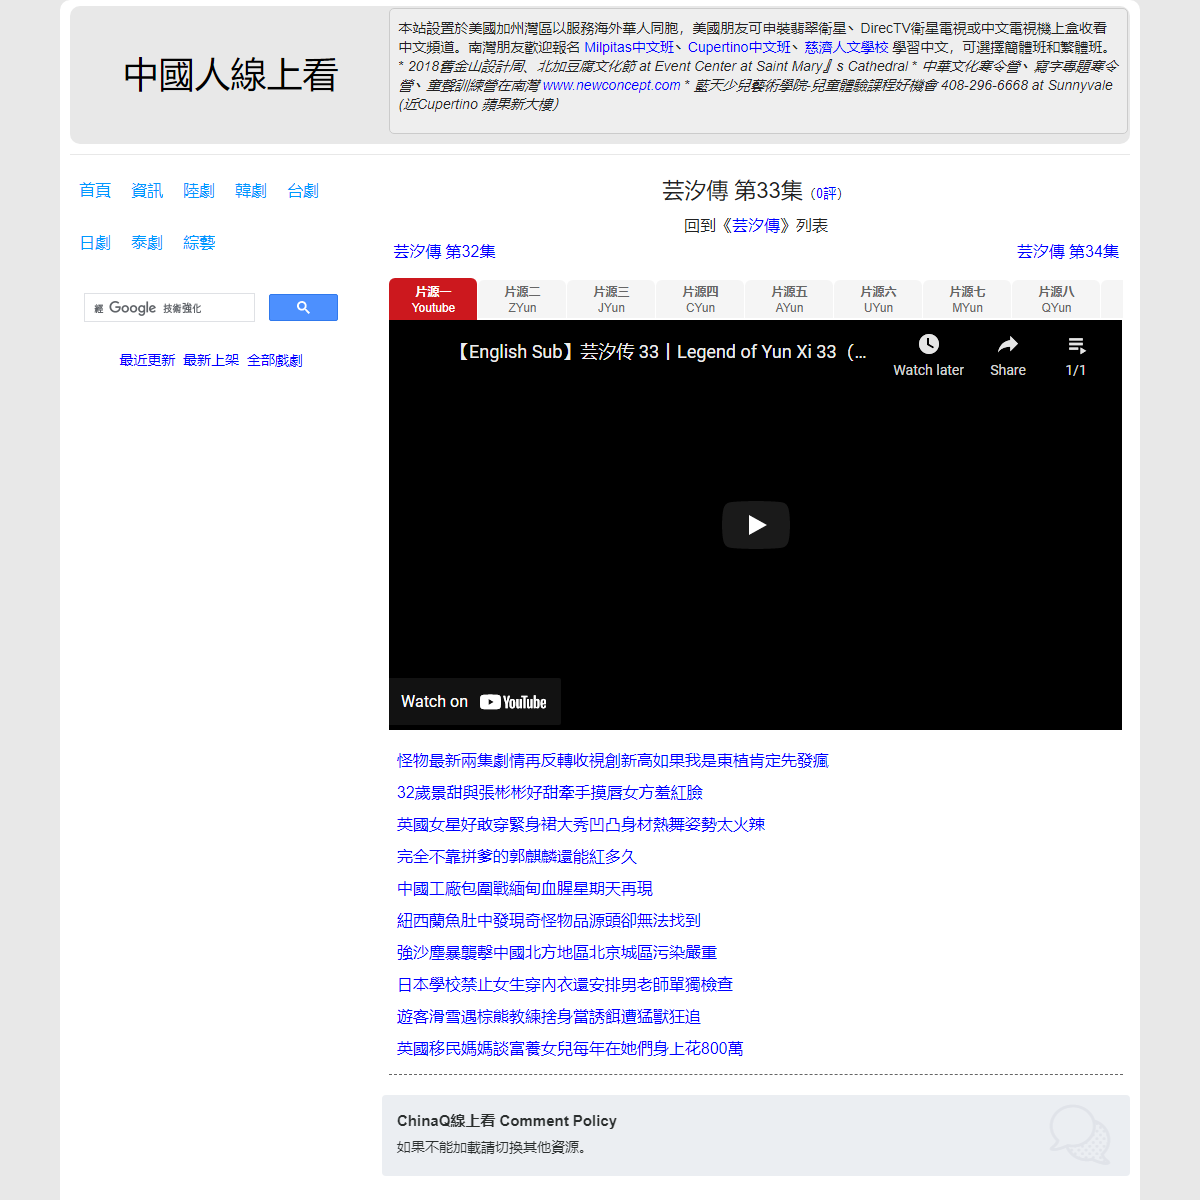 A complete backup of https://chinaq.tv/cn180625/33.html